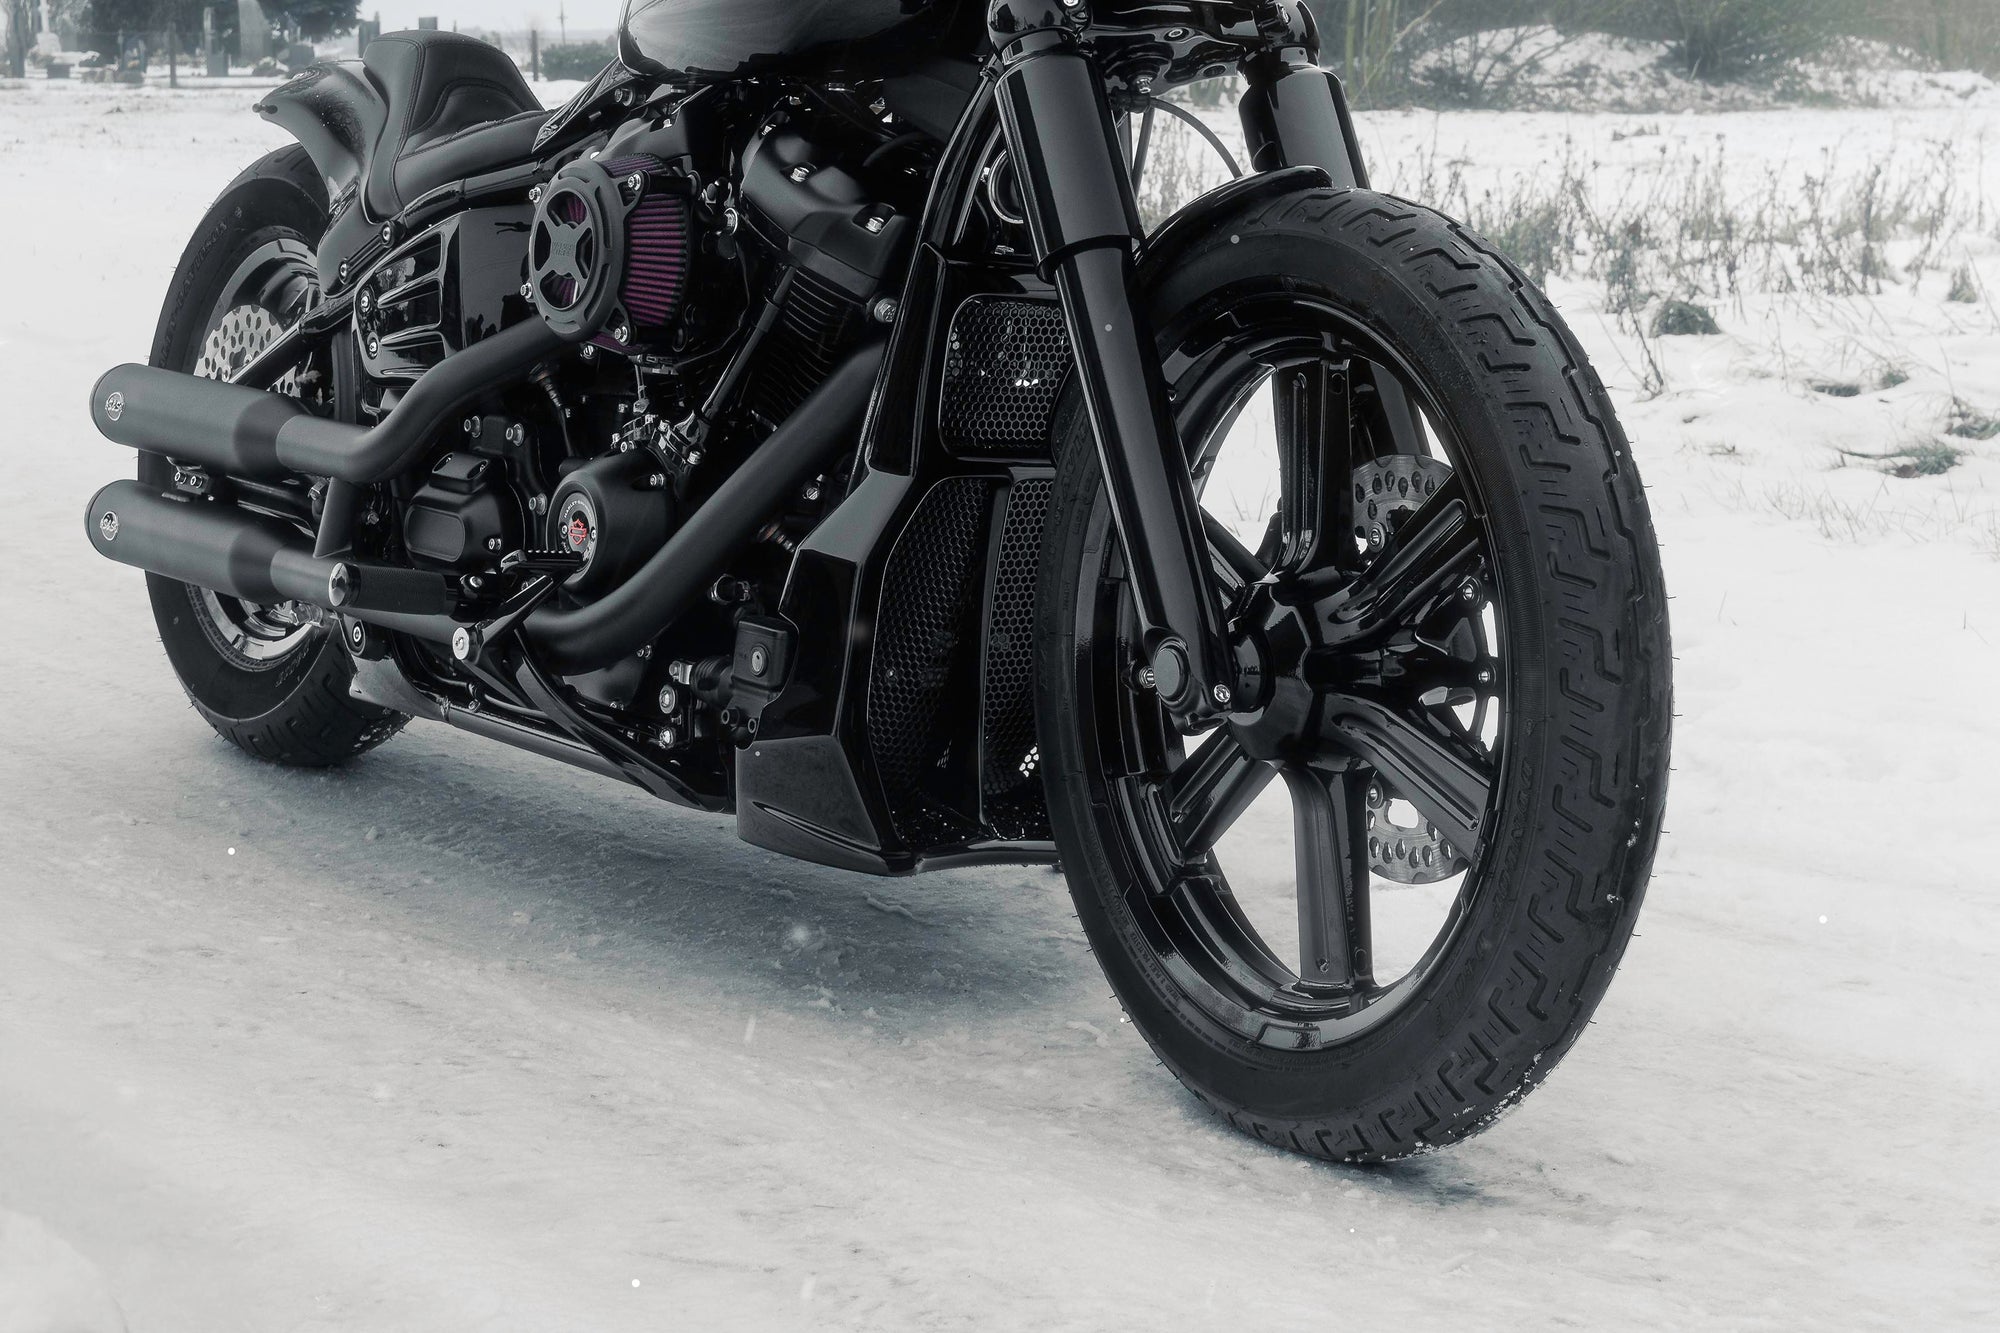 Zoomed Harley Davidson motorcycle with Killer Custom parts from the front outside on a snowy day